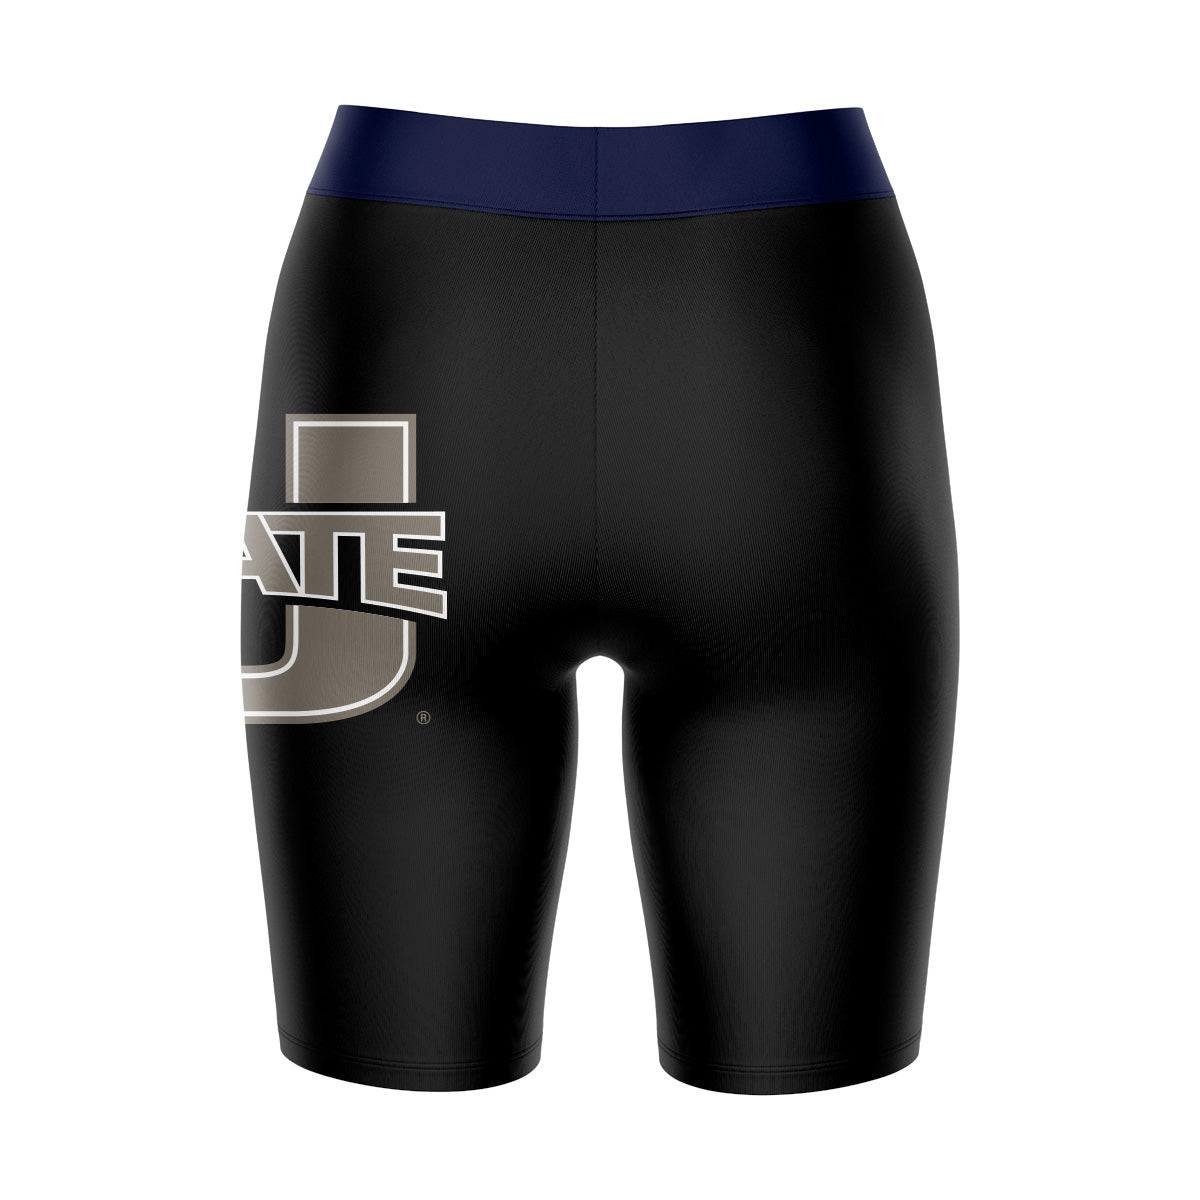 Utah State Aggies Vive La Fete Game Day Logo on Thigh and Waistband Black and Navy Women Bike Short 9 Inseam"